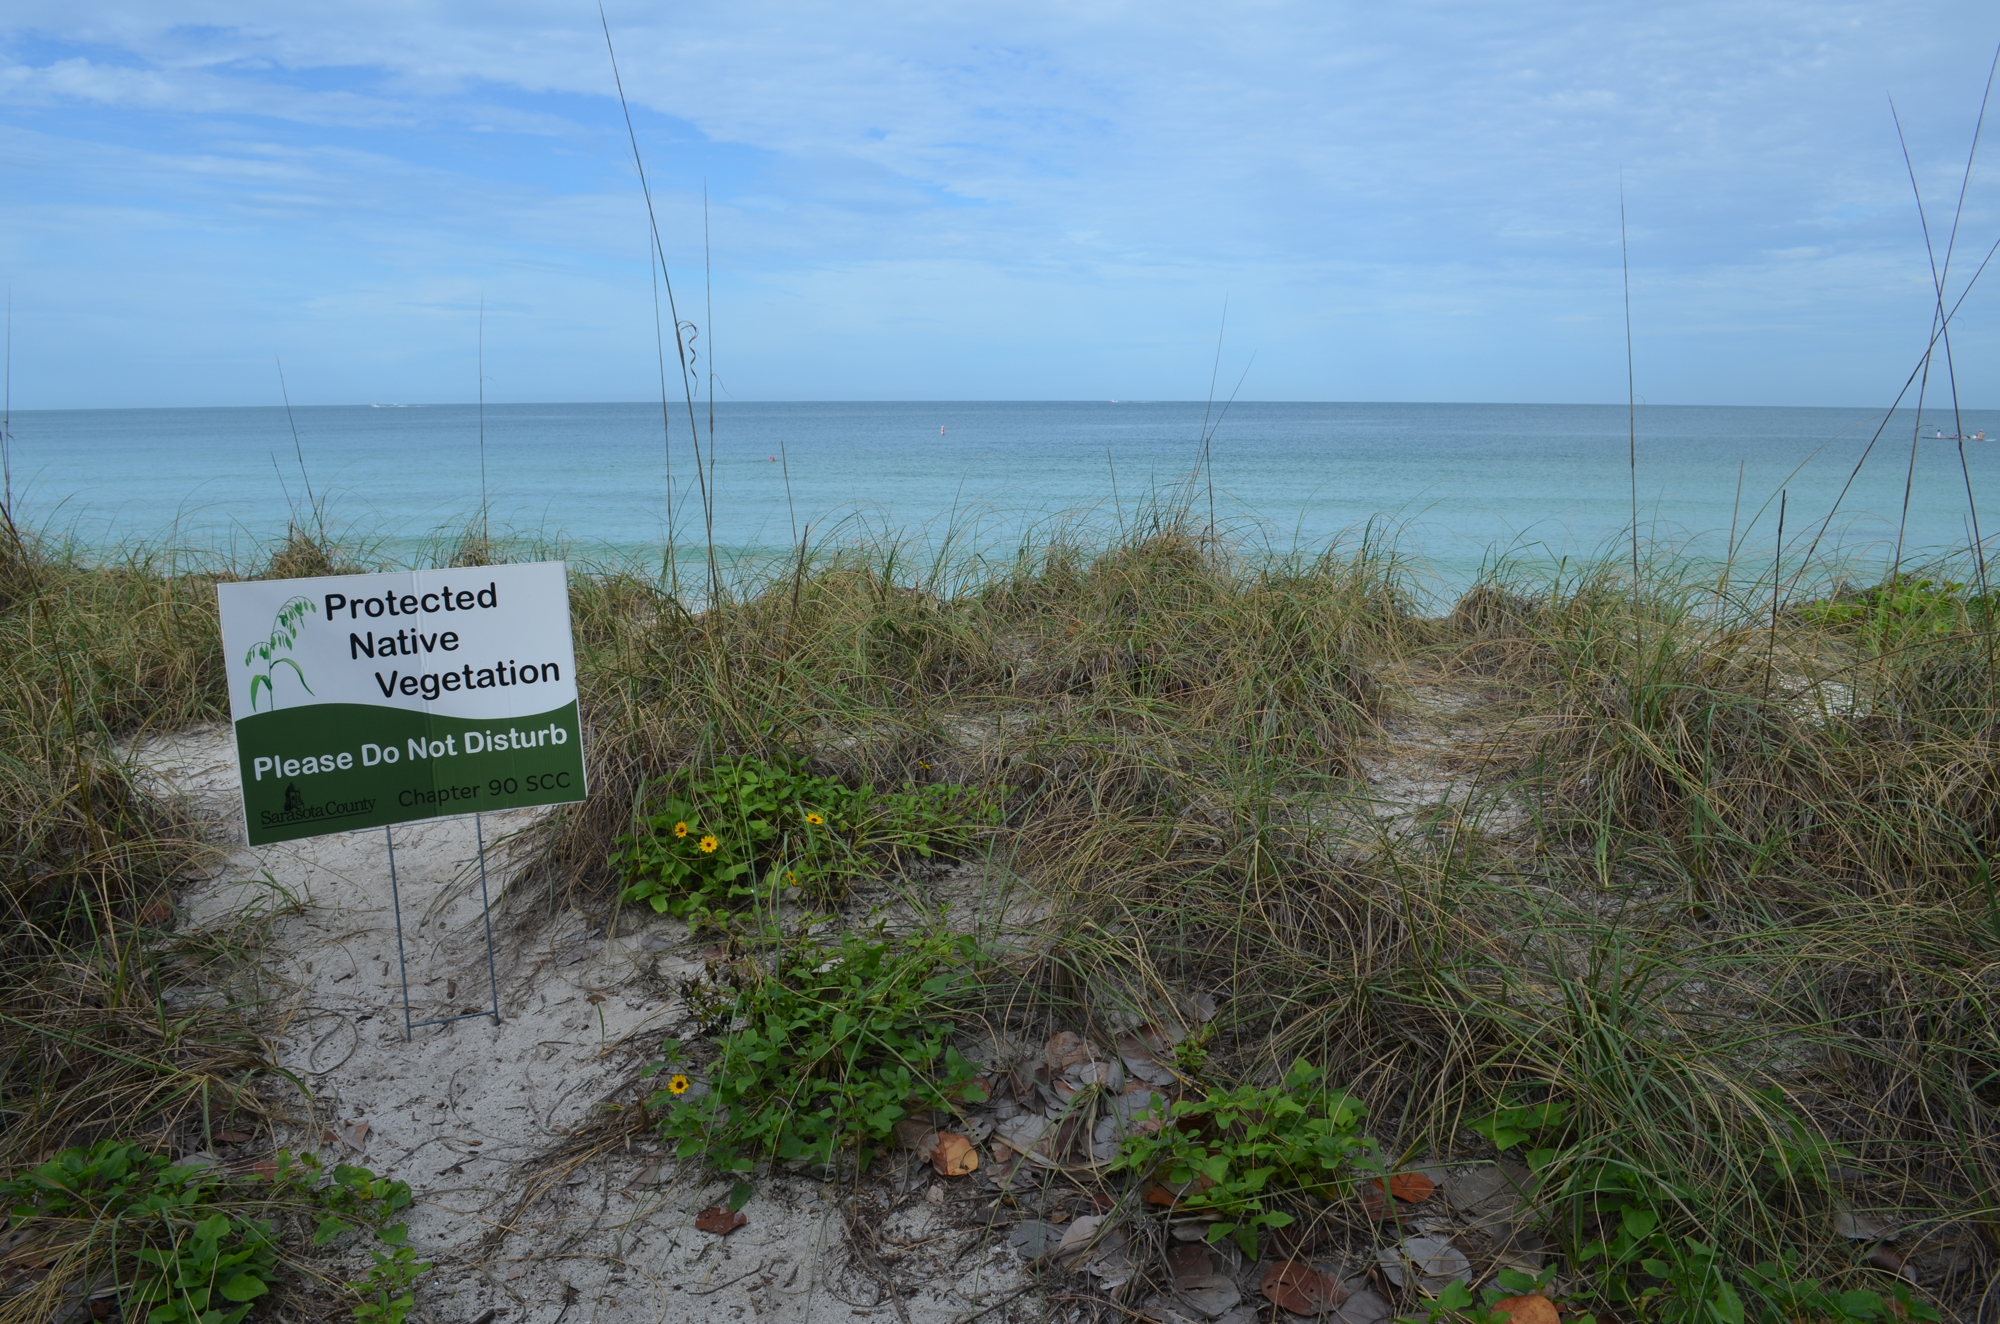 The county is placing more signs along Lido Beach to tell visitors to steer clear of the dunes.